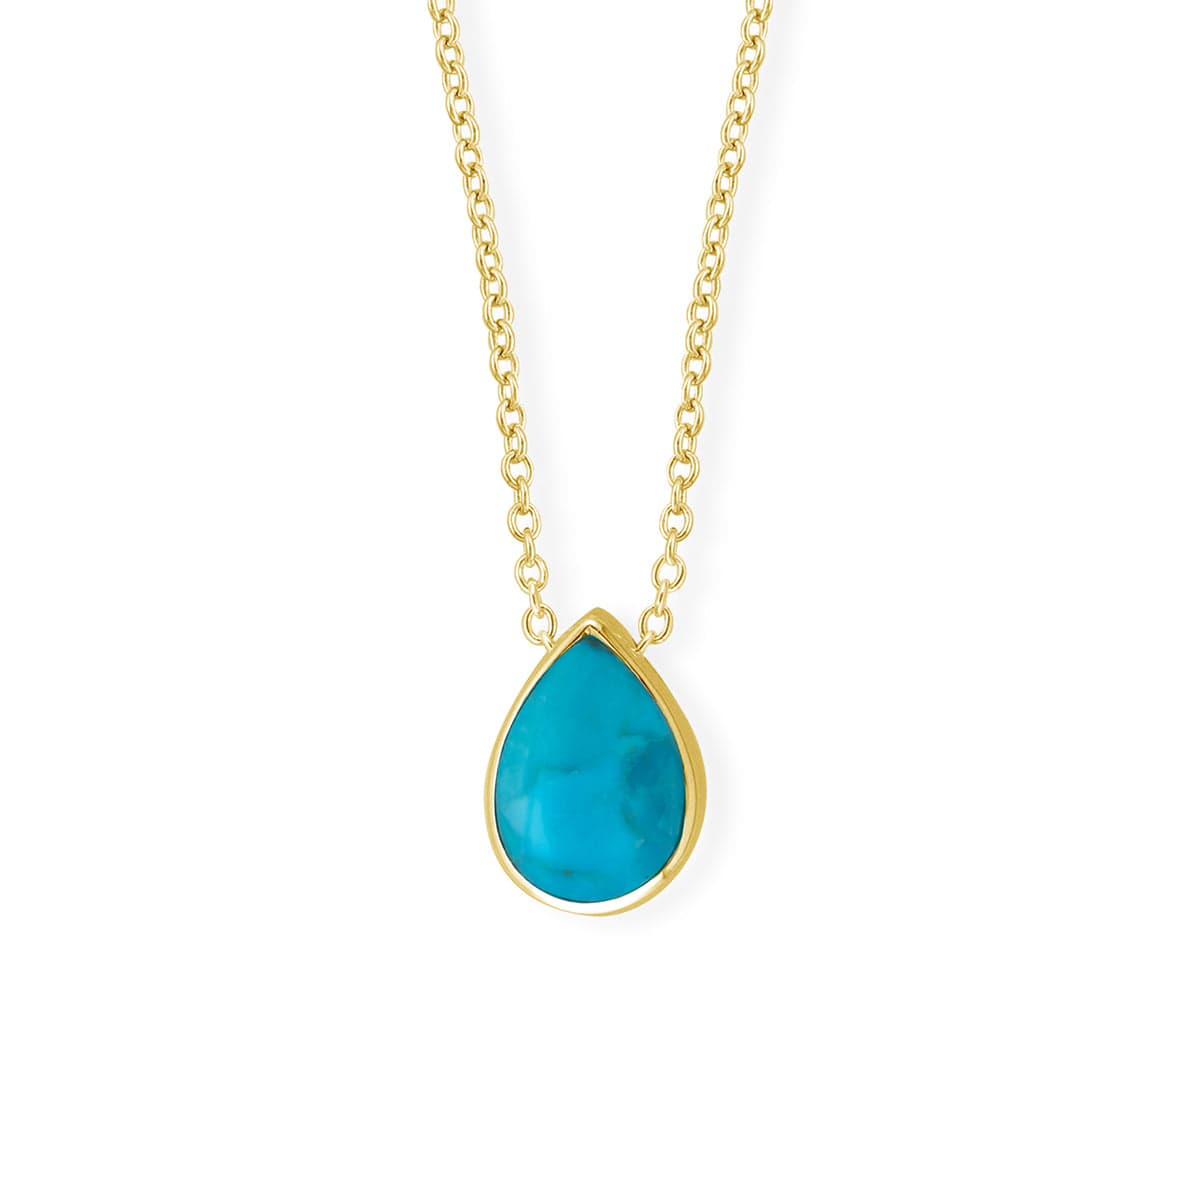 Boma Jewelry Necklaces Turquoise / 14K Gold Plated Treasured Teardrop Pendant Necklace